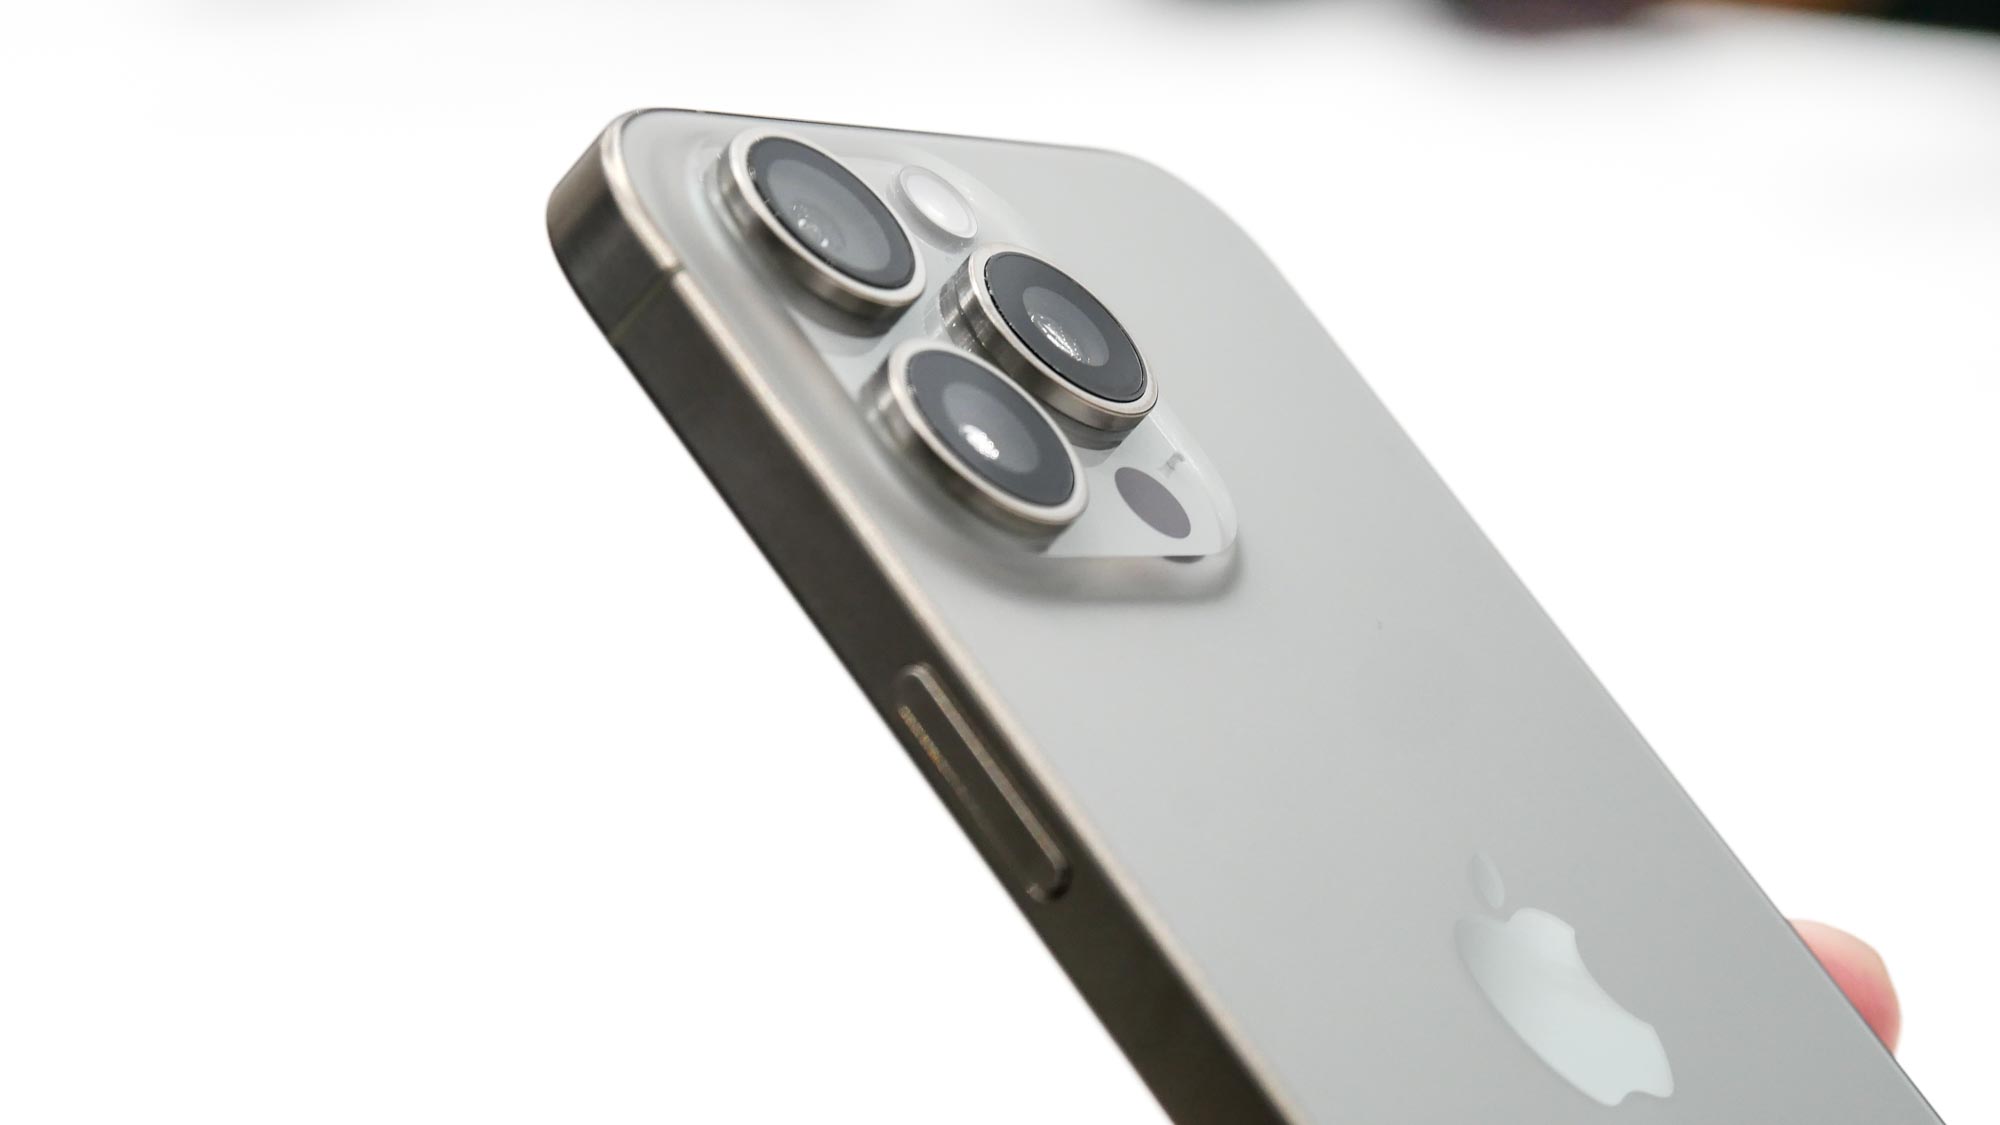 iPhone 15 Pro availability, price, specs, design and cameras